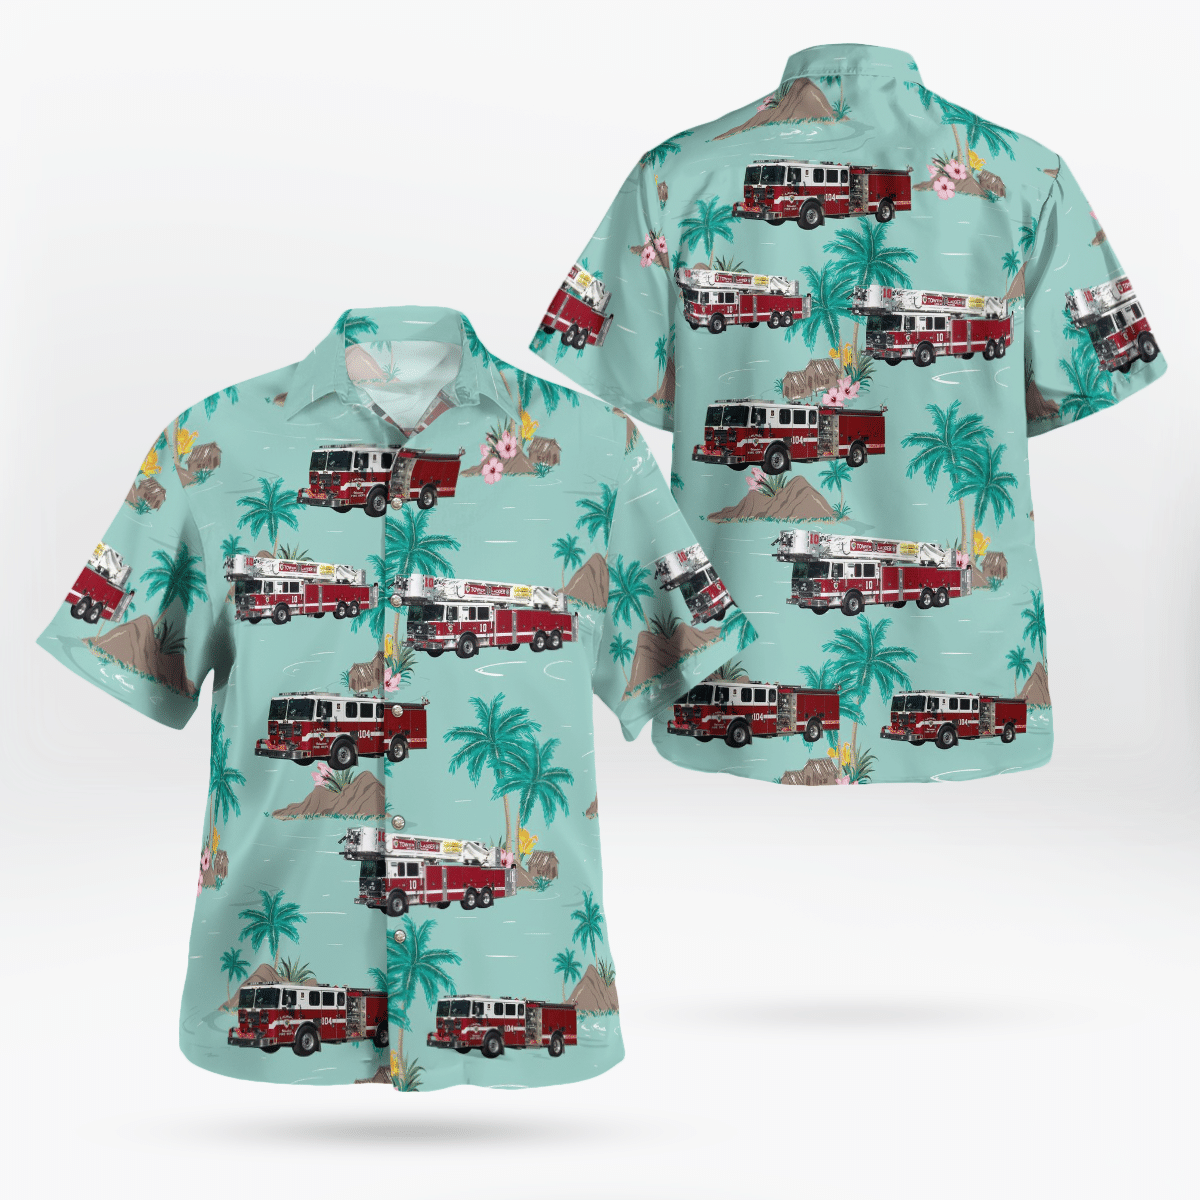 Consider getting these Hawaiian Shirt for your friends 71